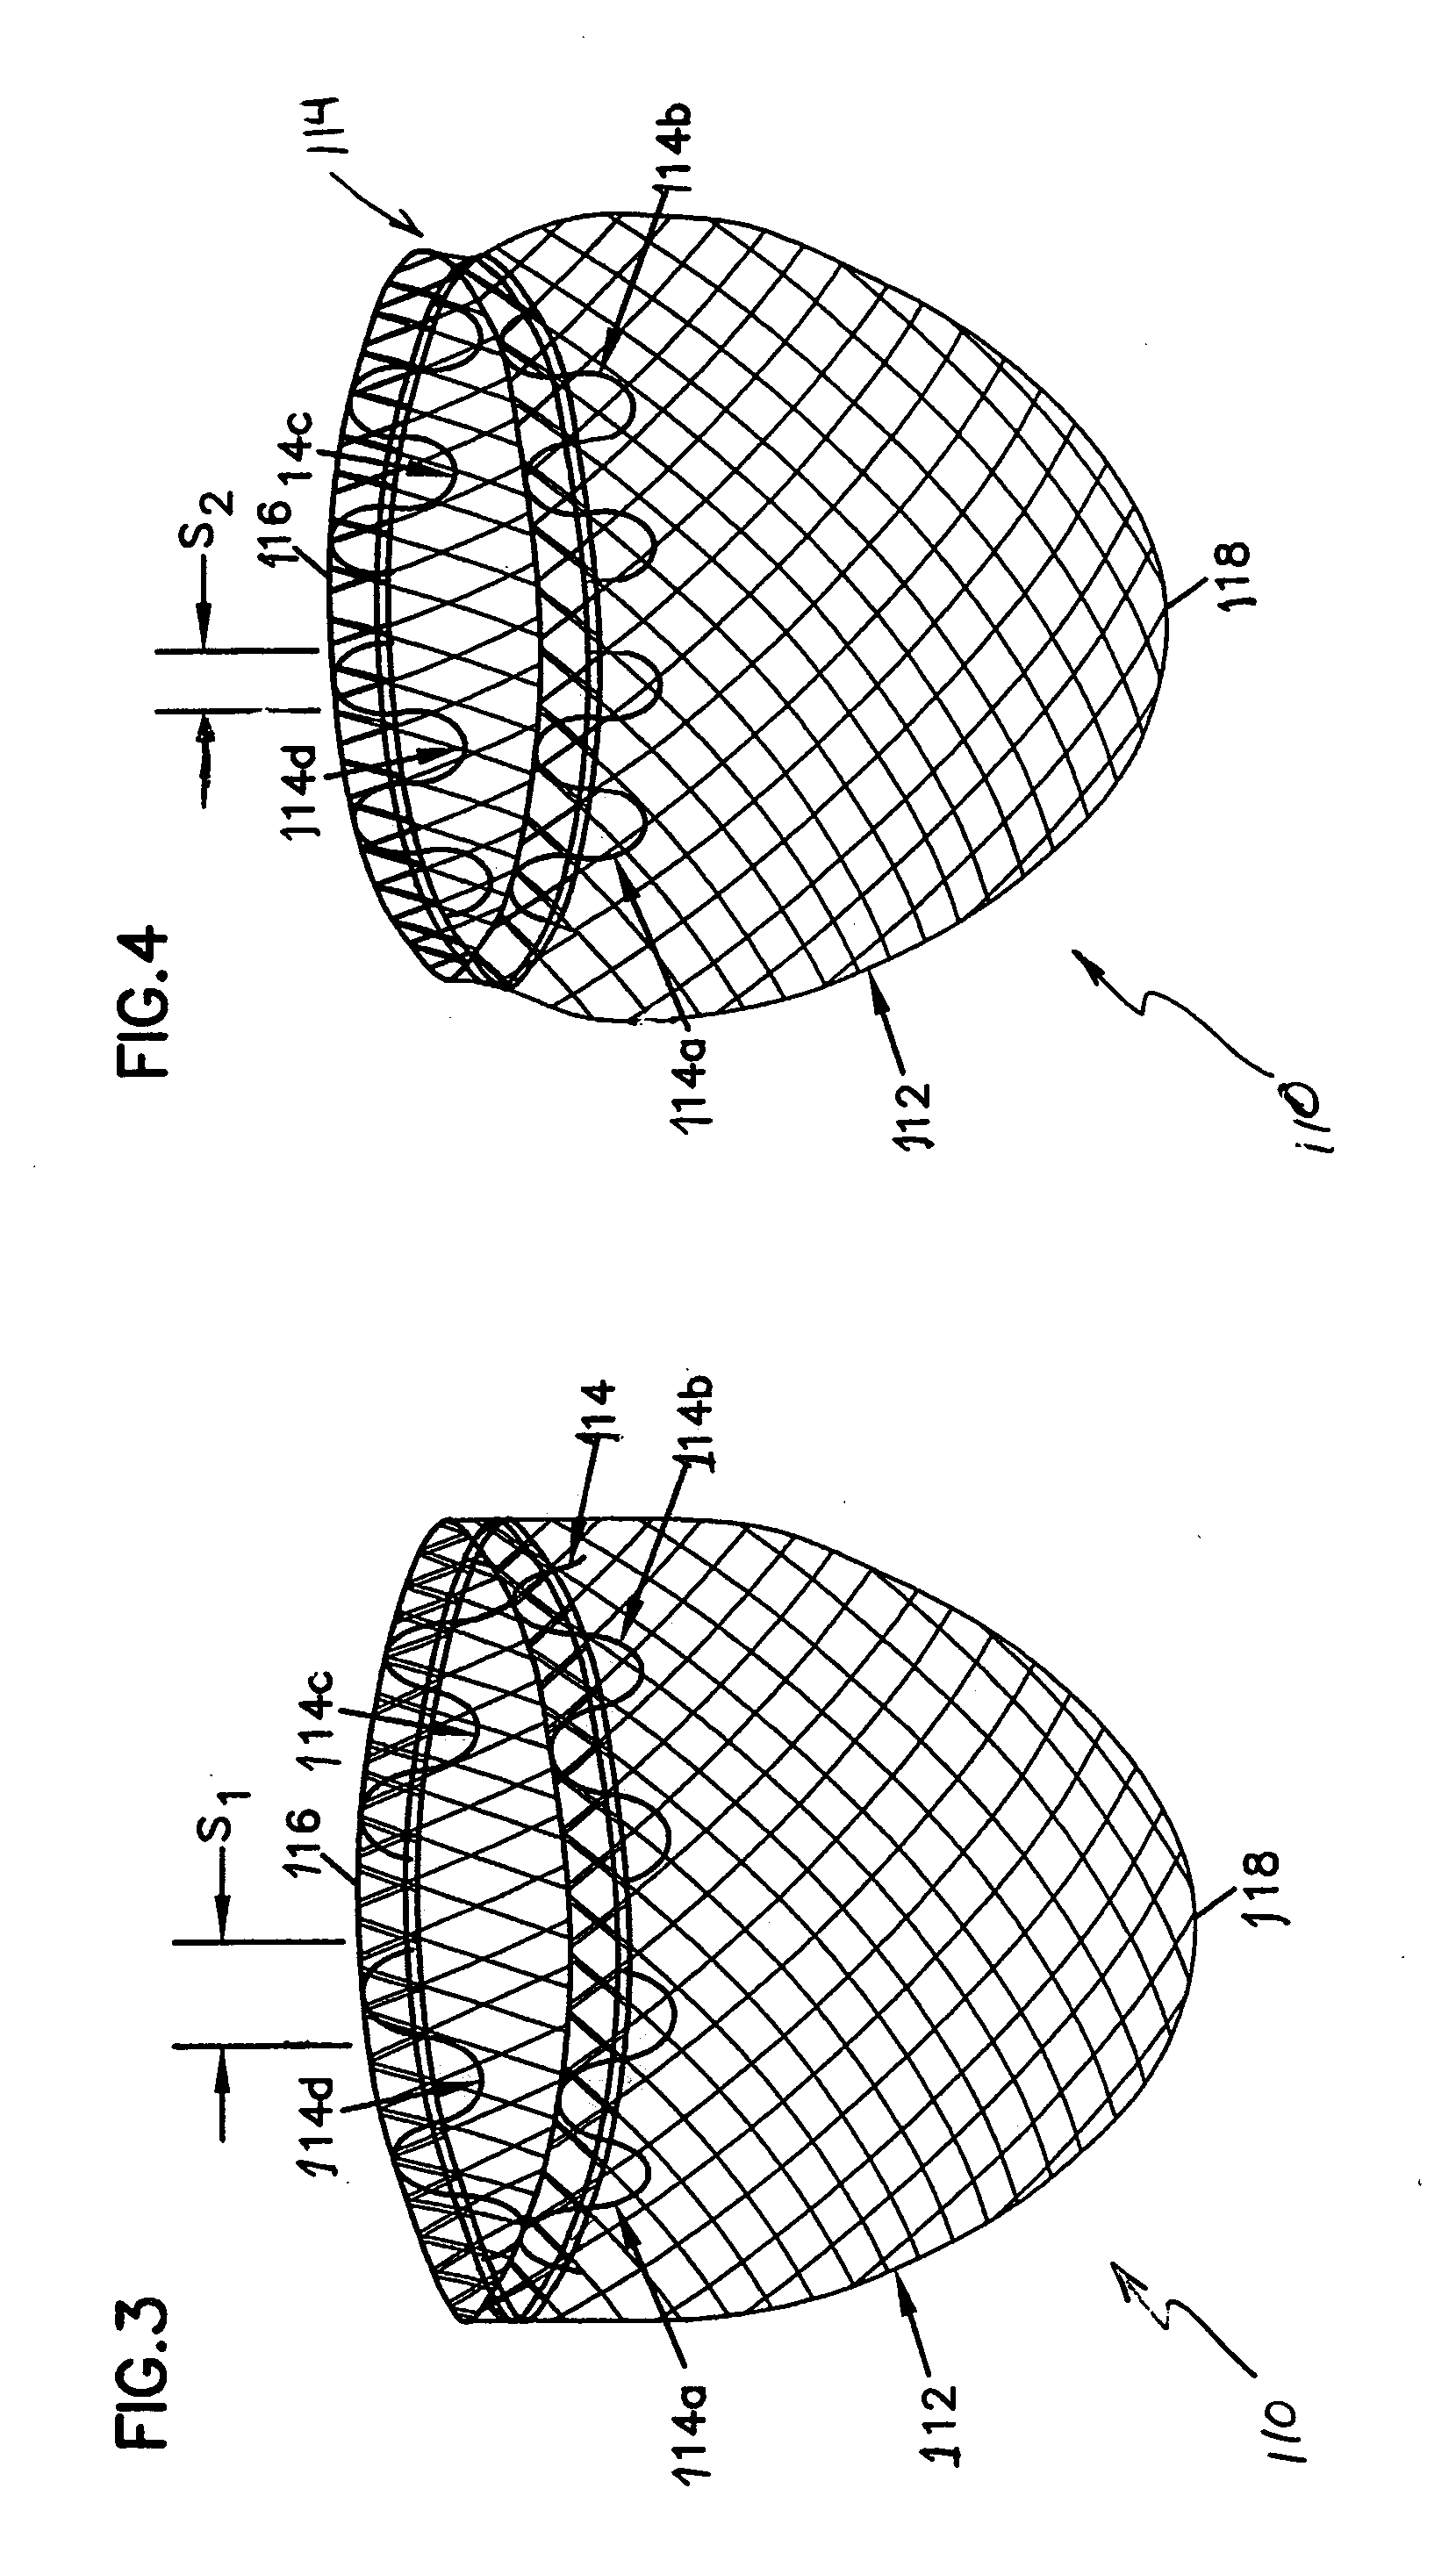 Self-adjusting attachment structure for a cardiac support device